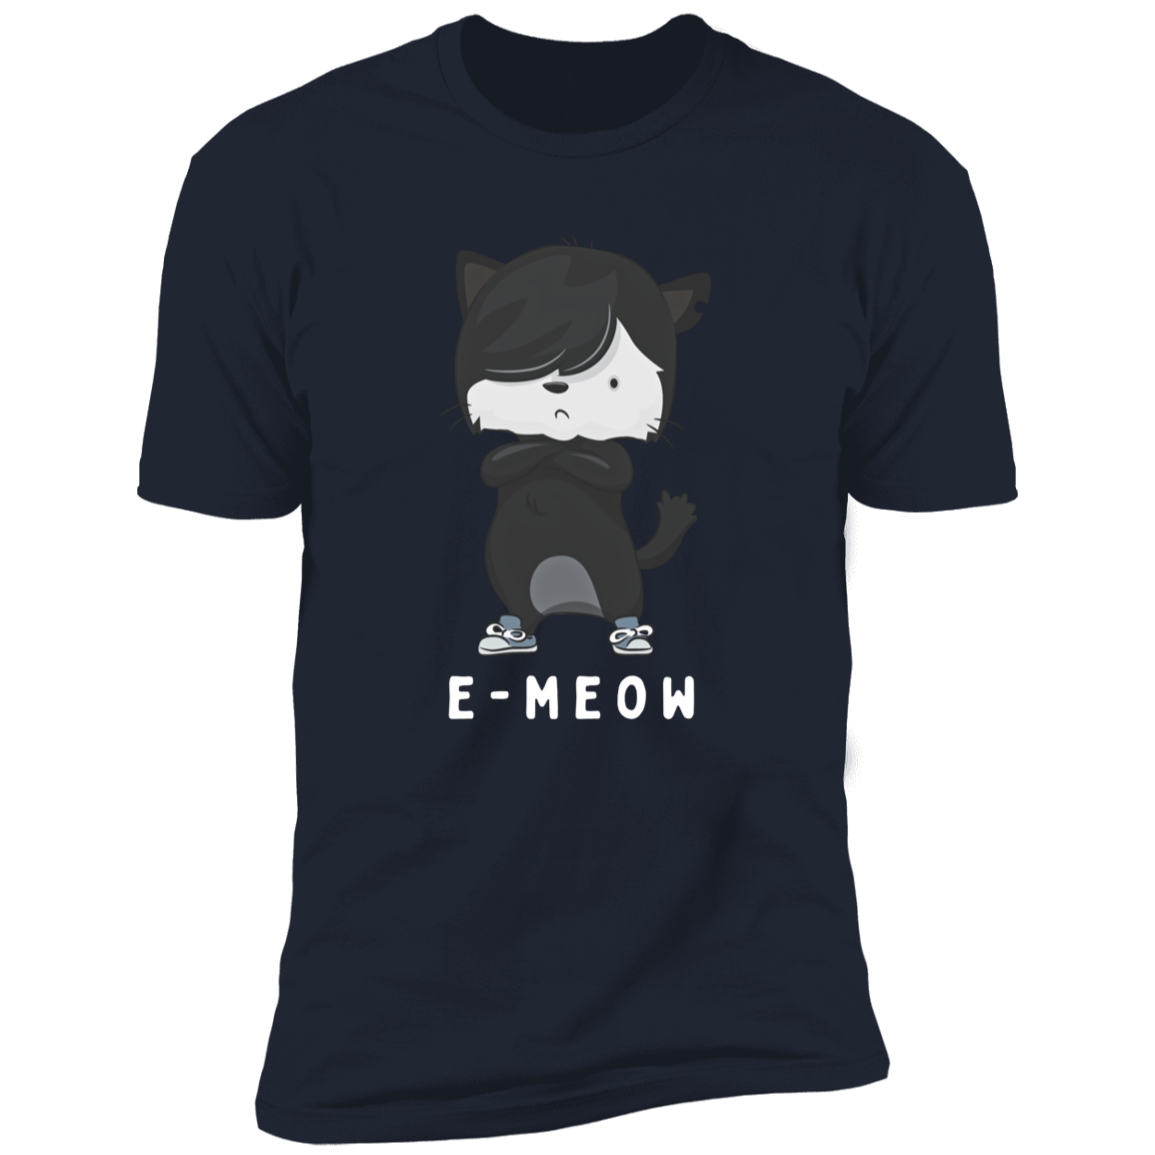 E-meow cat shirt, funny cat shirt for humans, cat mom and cat dad shirt, in navy blue